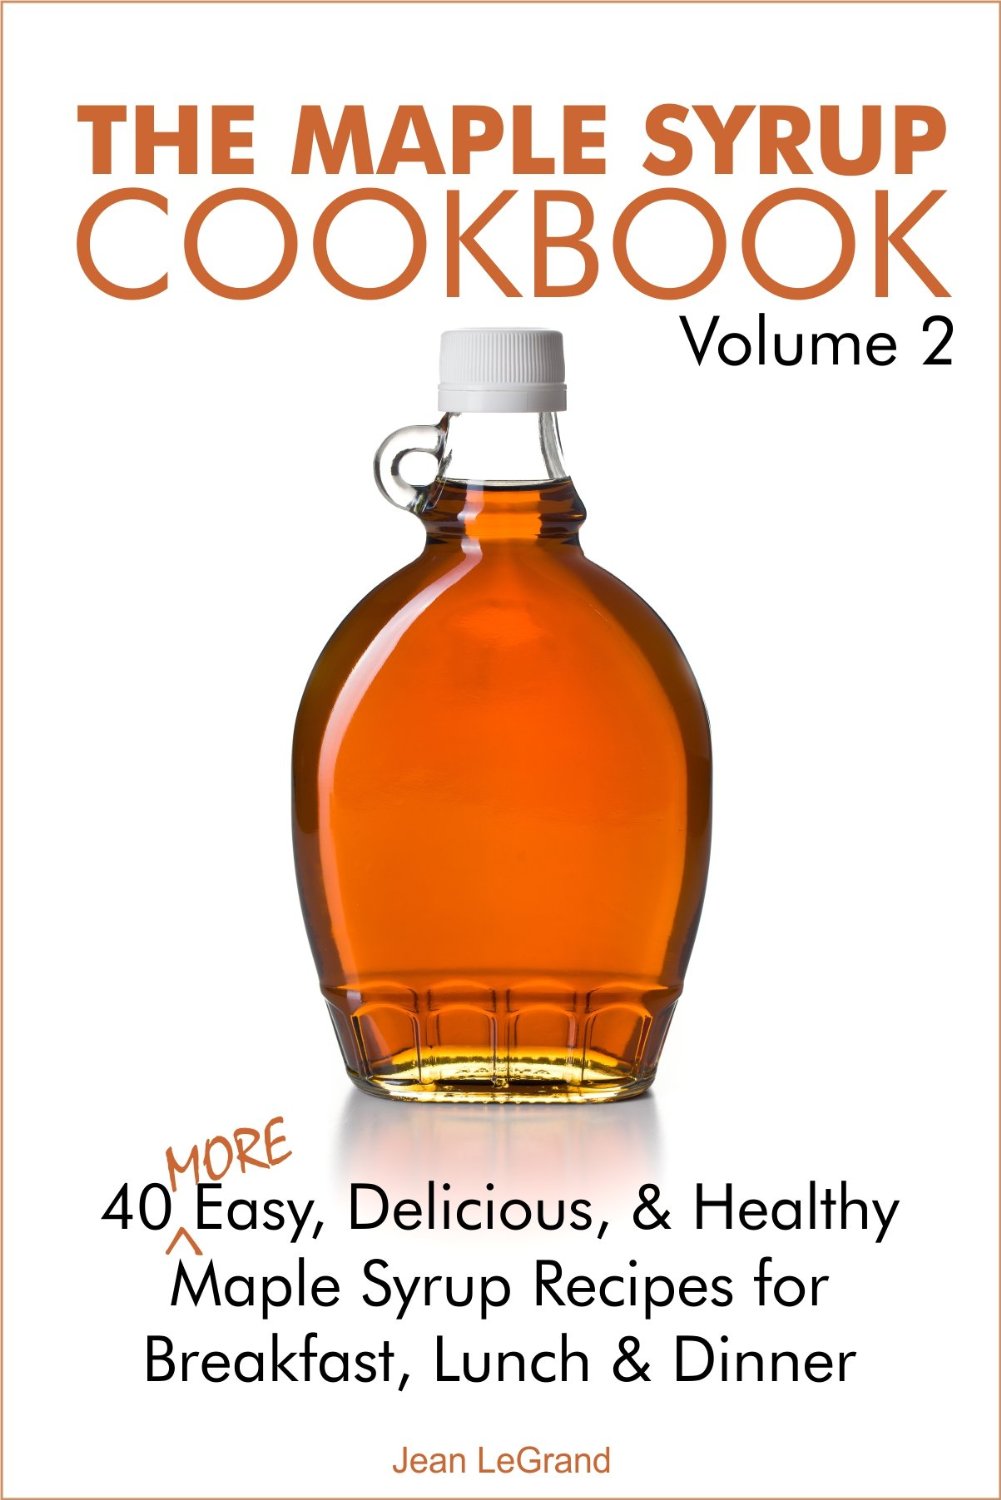 The Maple Syrup Cookbook #2 by Jean LeGrand